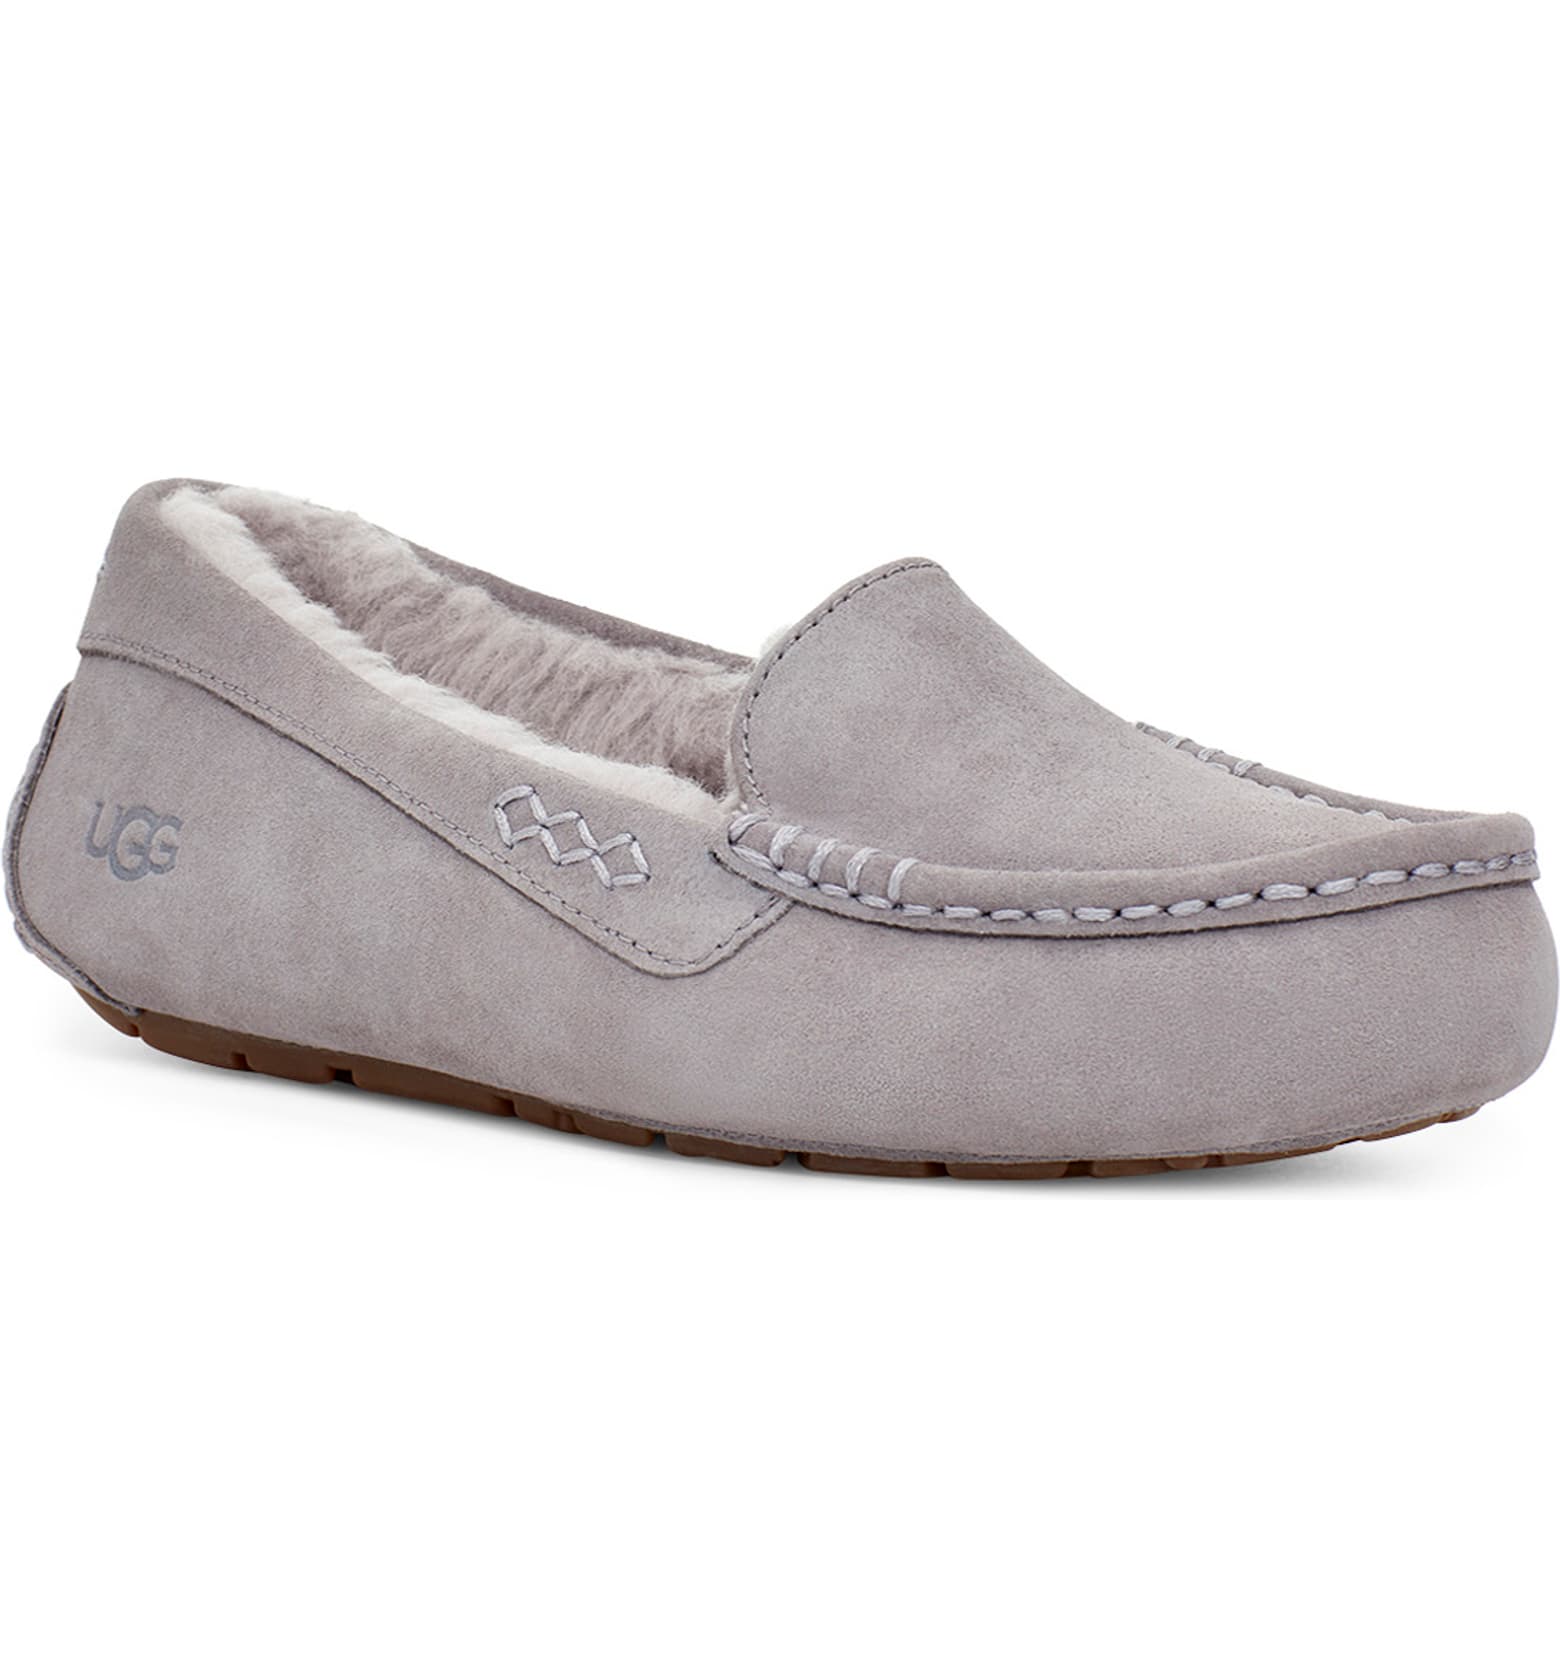 ugg Ansley Water Resistant Slipper, work from home clothes